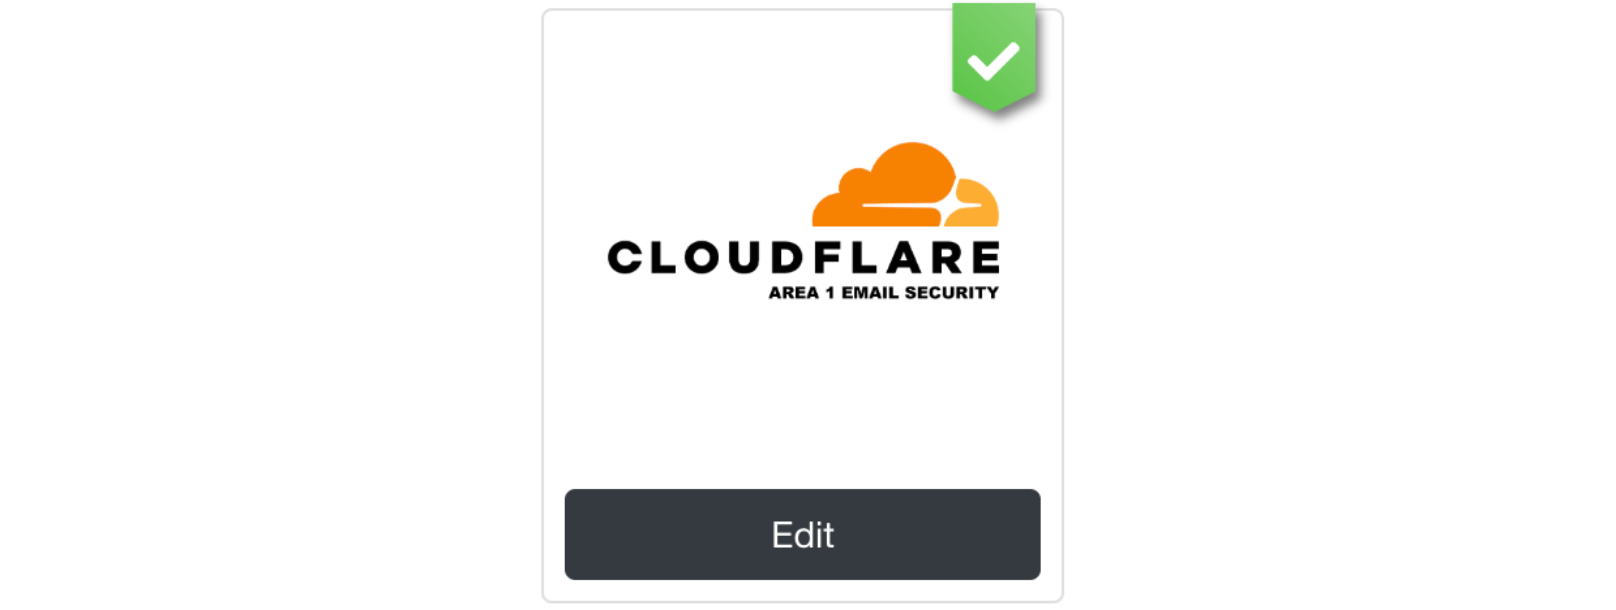 Cloudflare partners with KnowBe4 to equip organizations with real-time security coaching to avoid phishing attacks